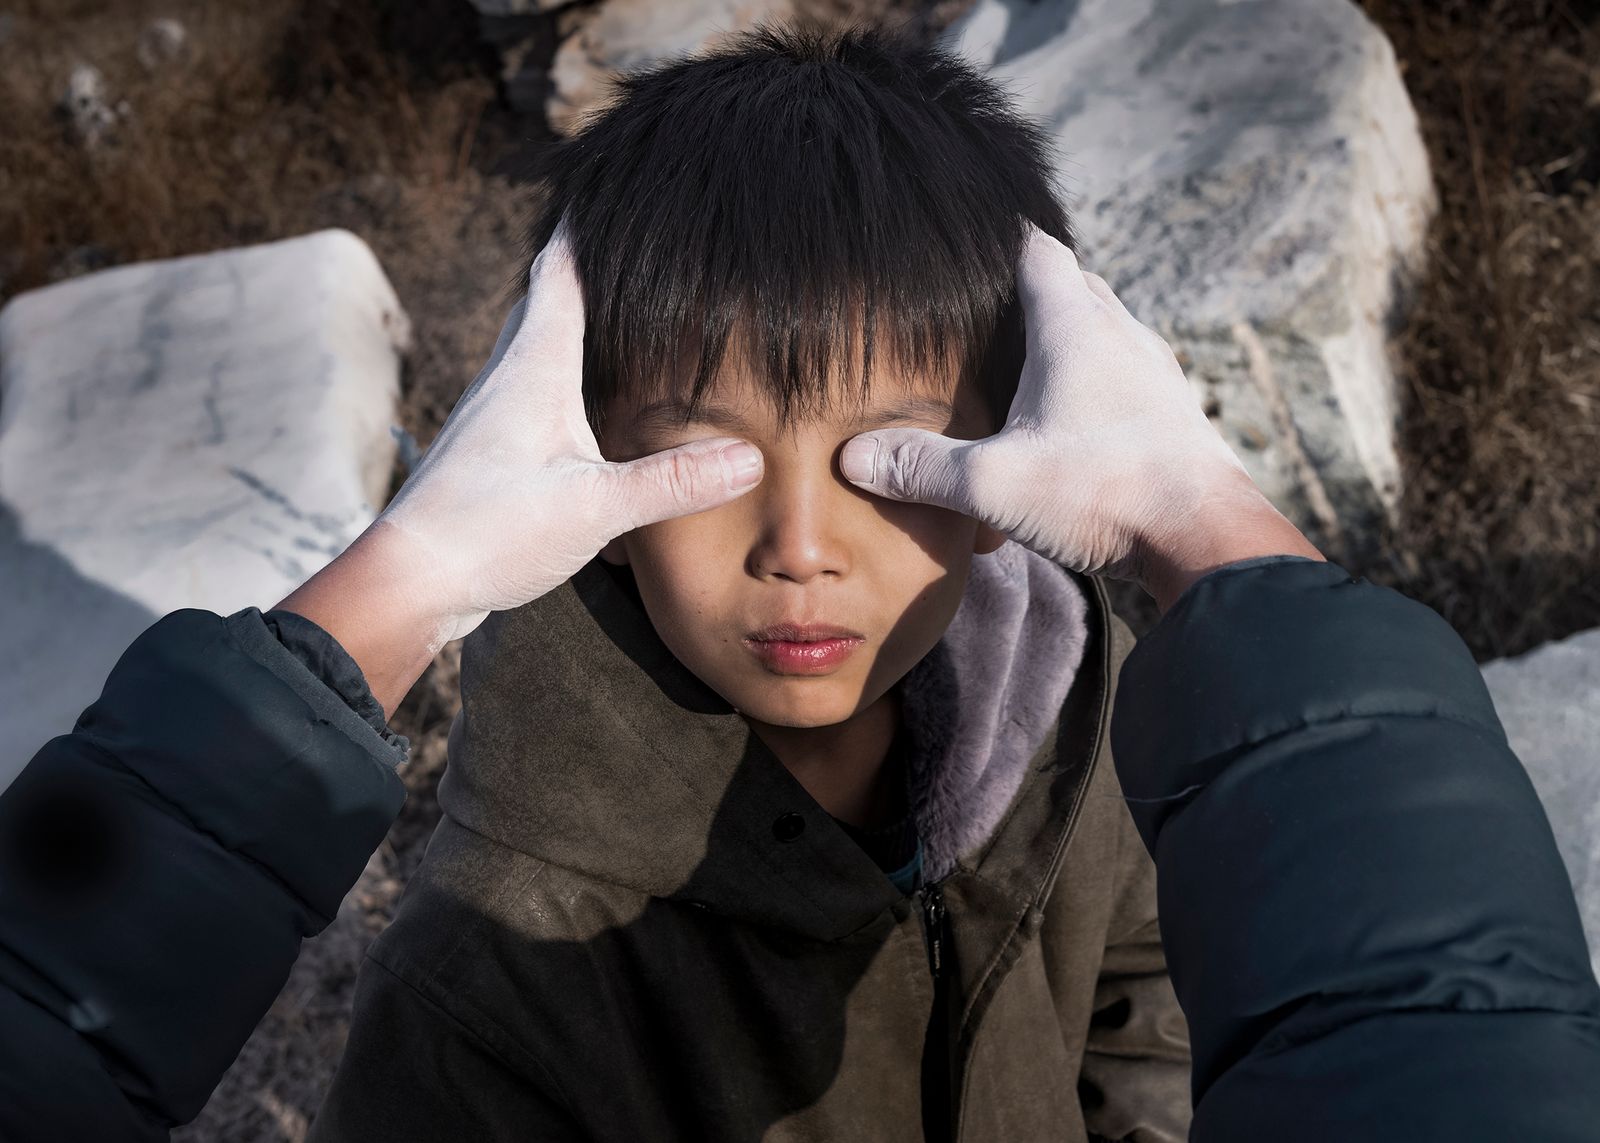 © Pang Hai - Image from the Heart Warming Rocks photography project